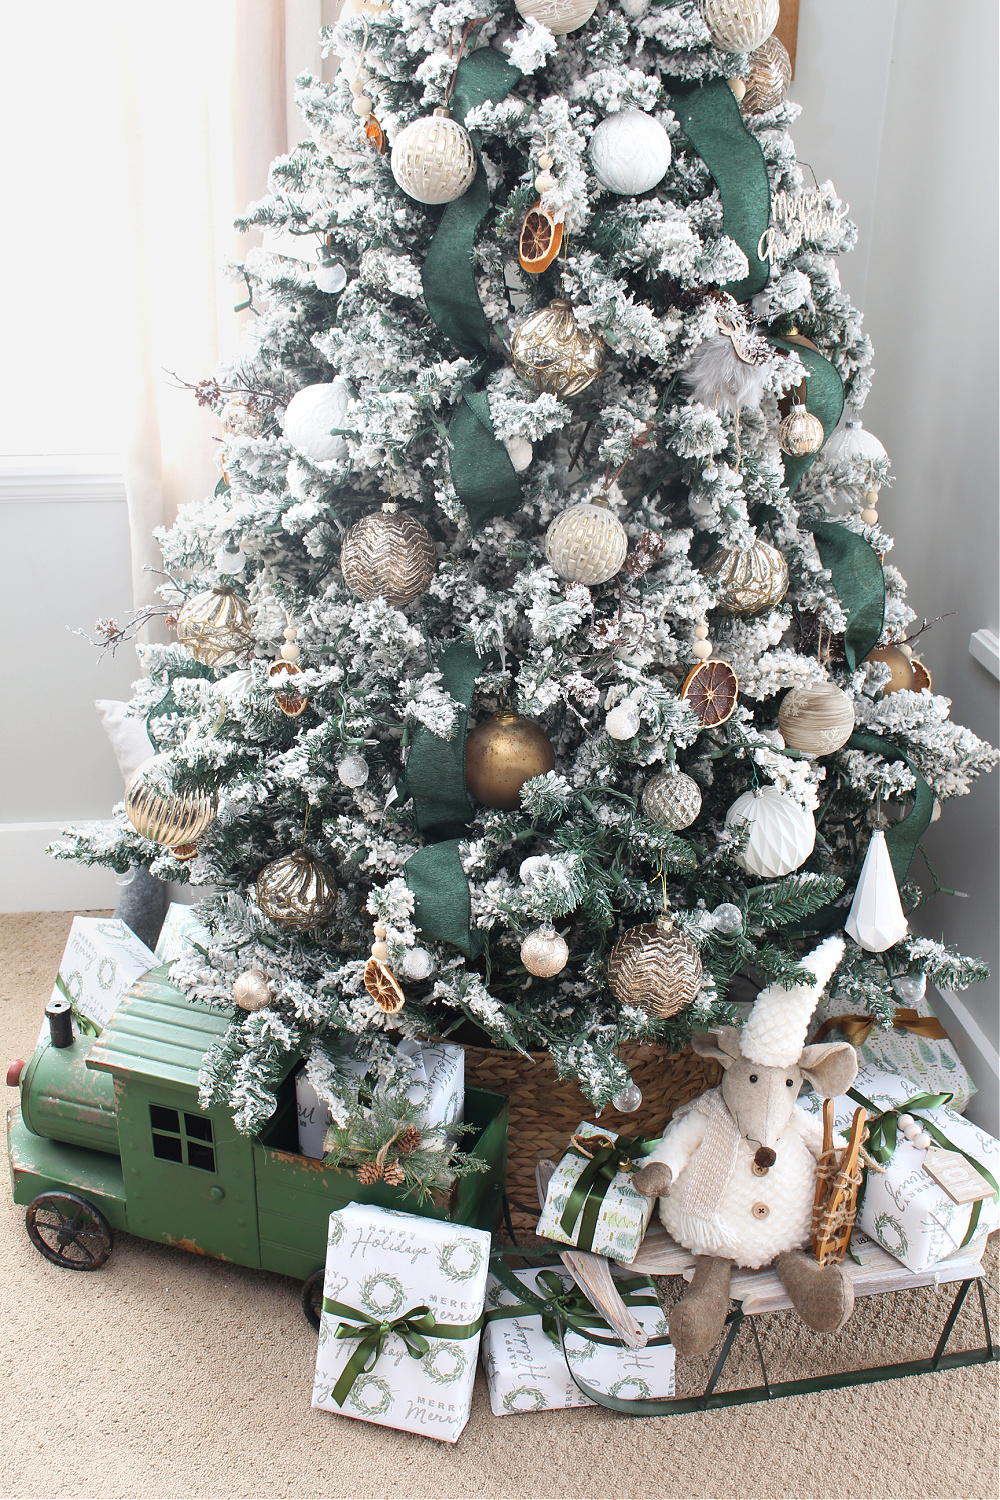 Christmas tree decorated with green ribbon and metallic ornaments.